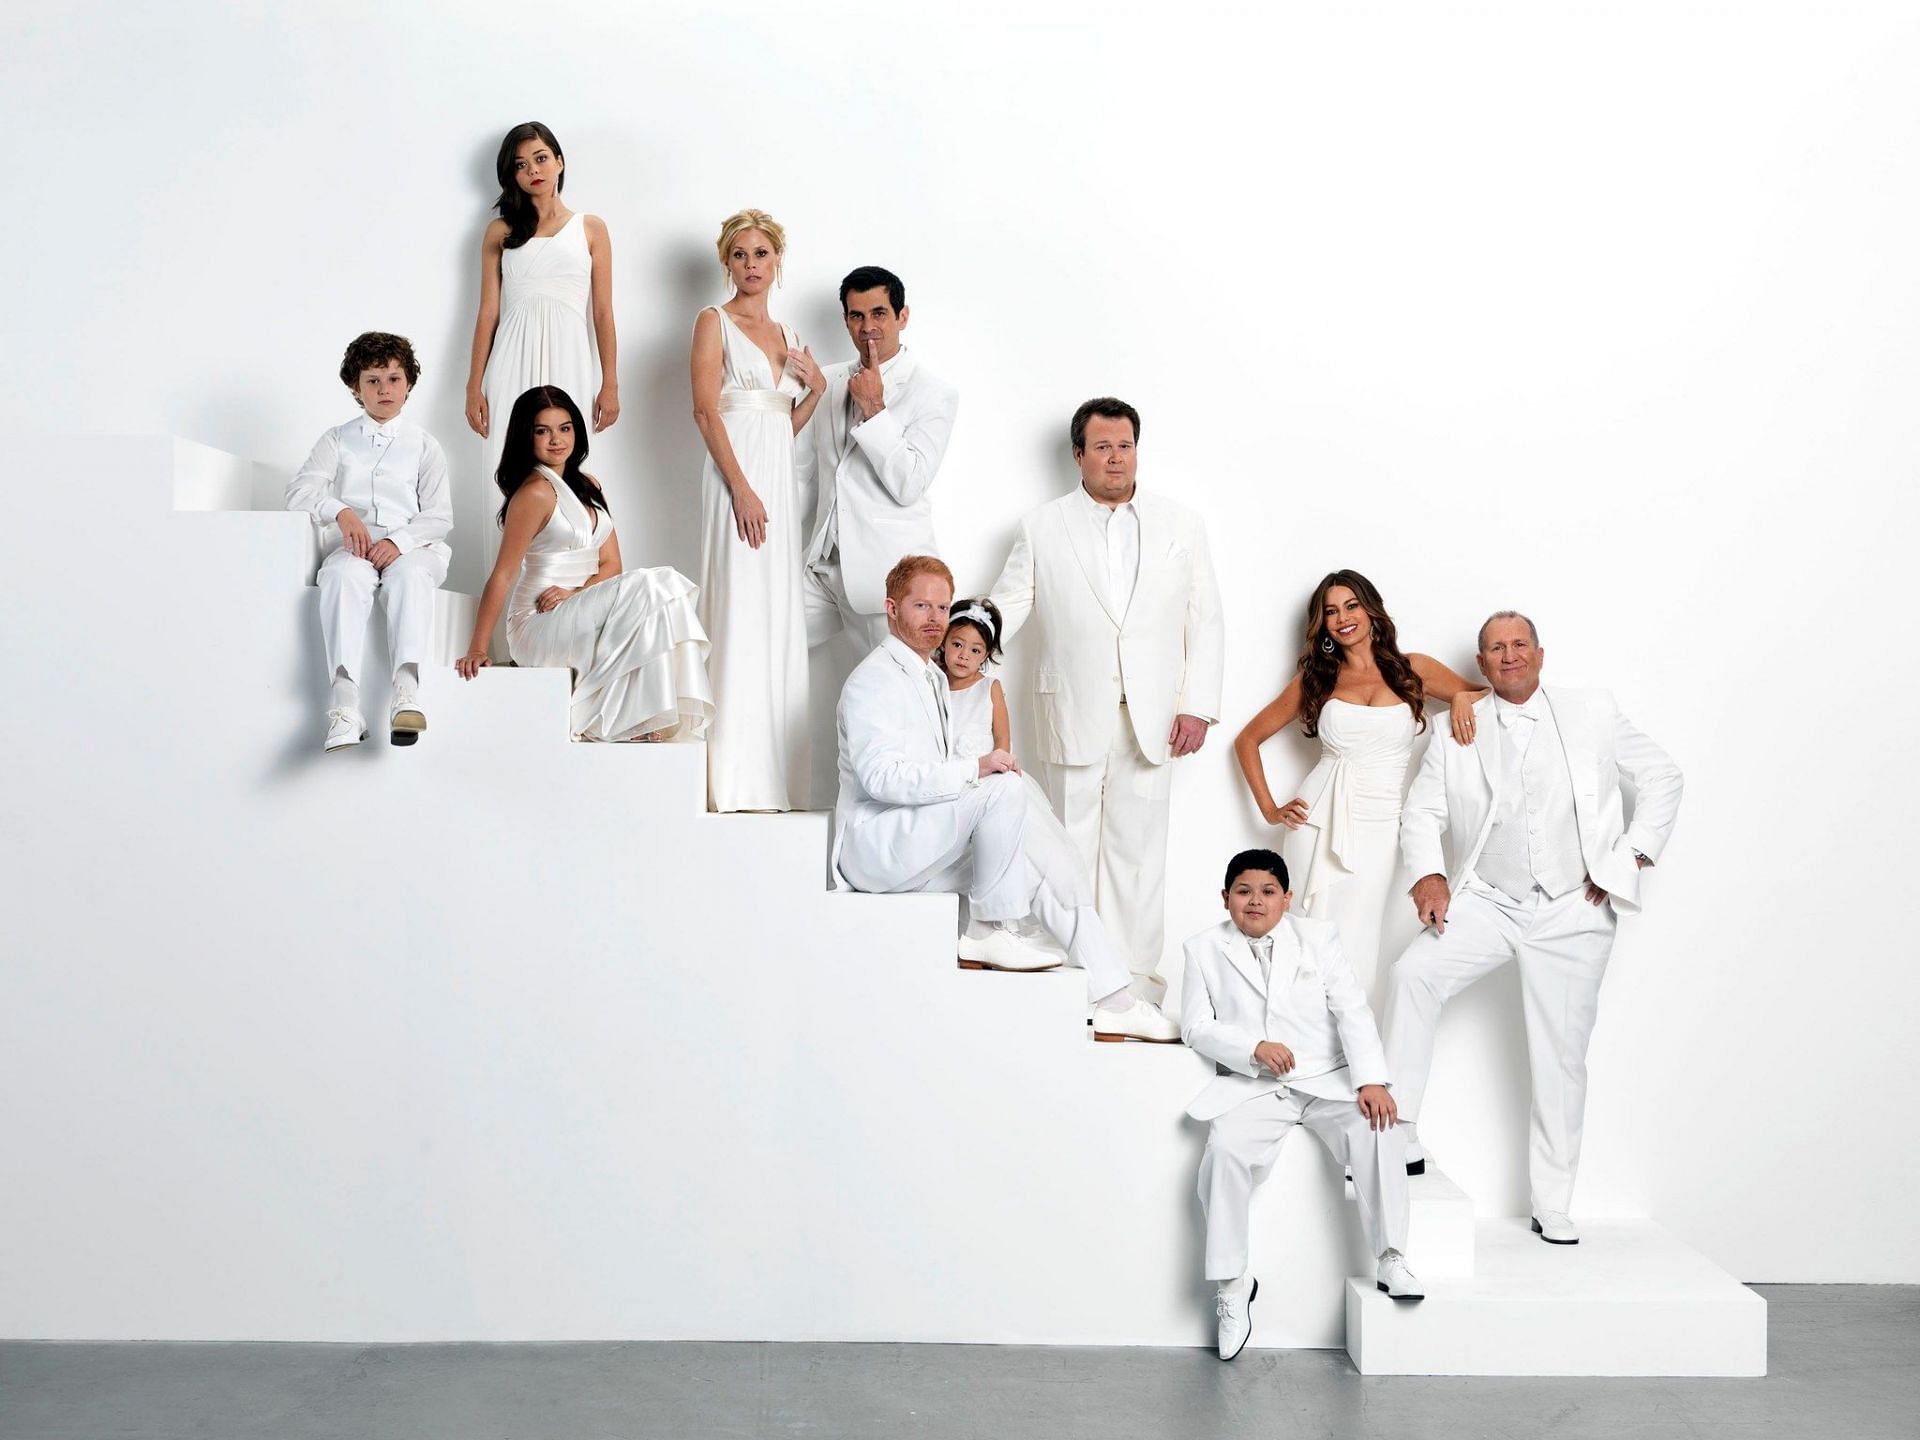 A photoshoot of the cast (Image via Facebook/Modern Family)